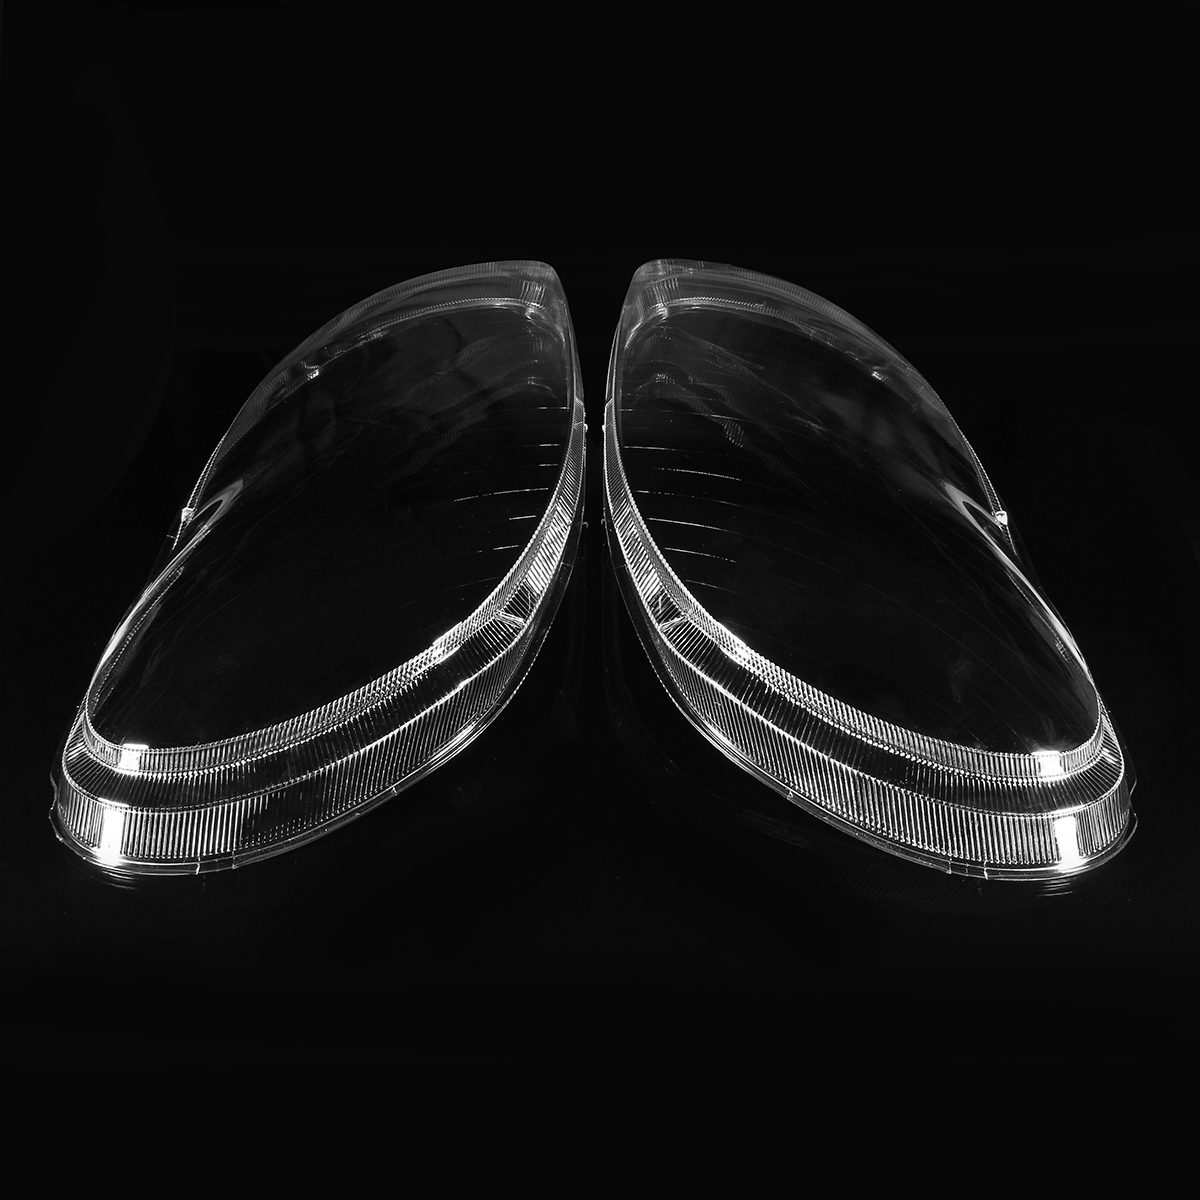 

Headlight Clear Lens Cover Replacement Cover for Benz W220 S600 S500 S320 S350 S280 1998-2005